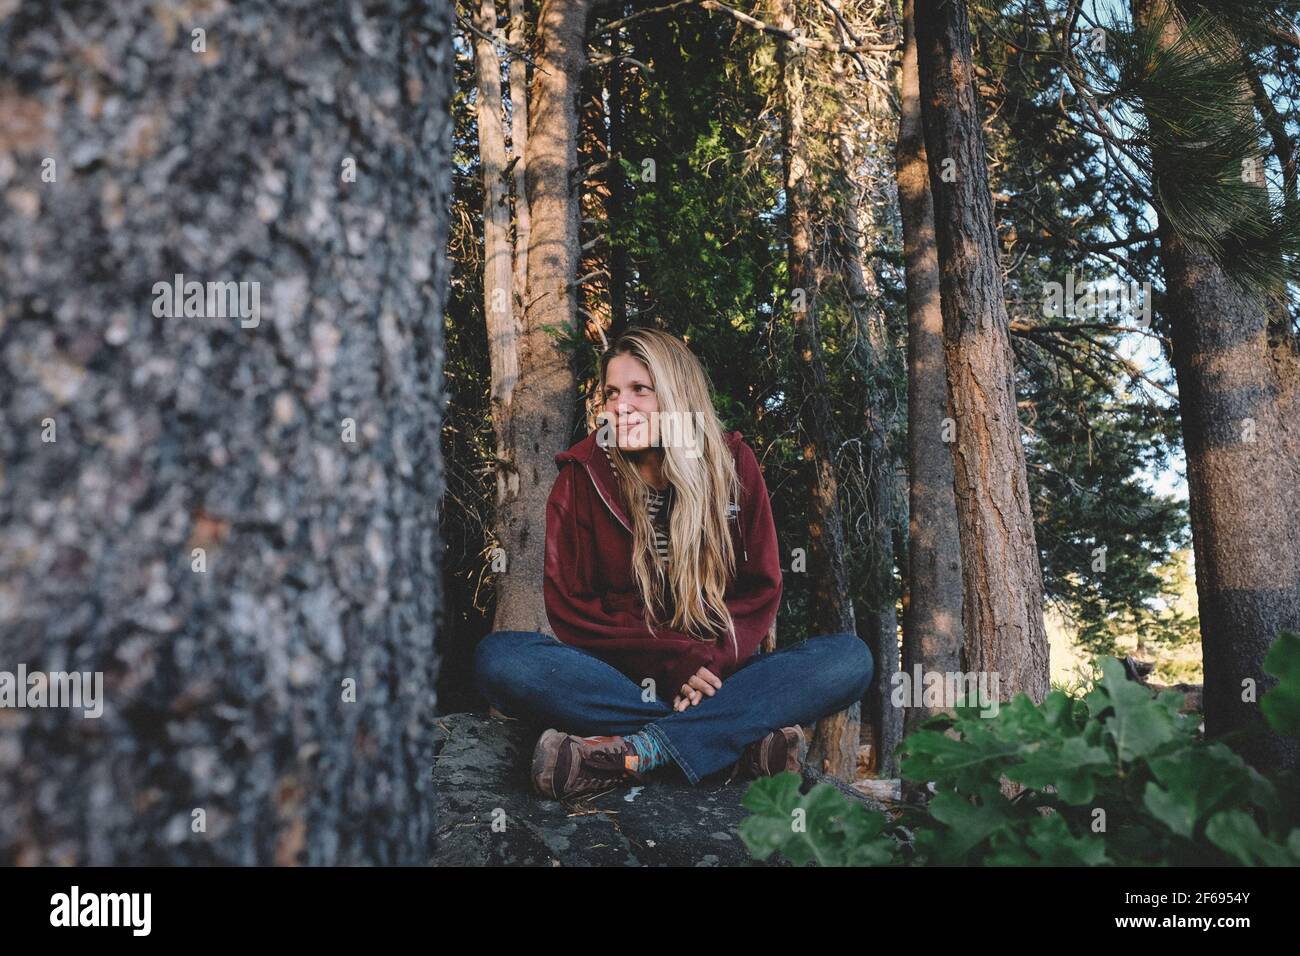 Blonde Woman sits peaceful in the Middle of a forest Stock Photo